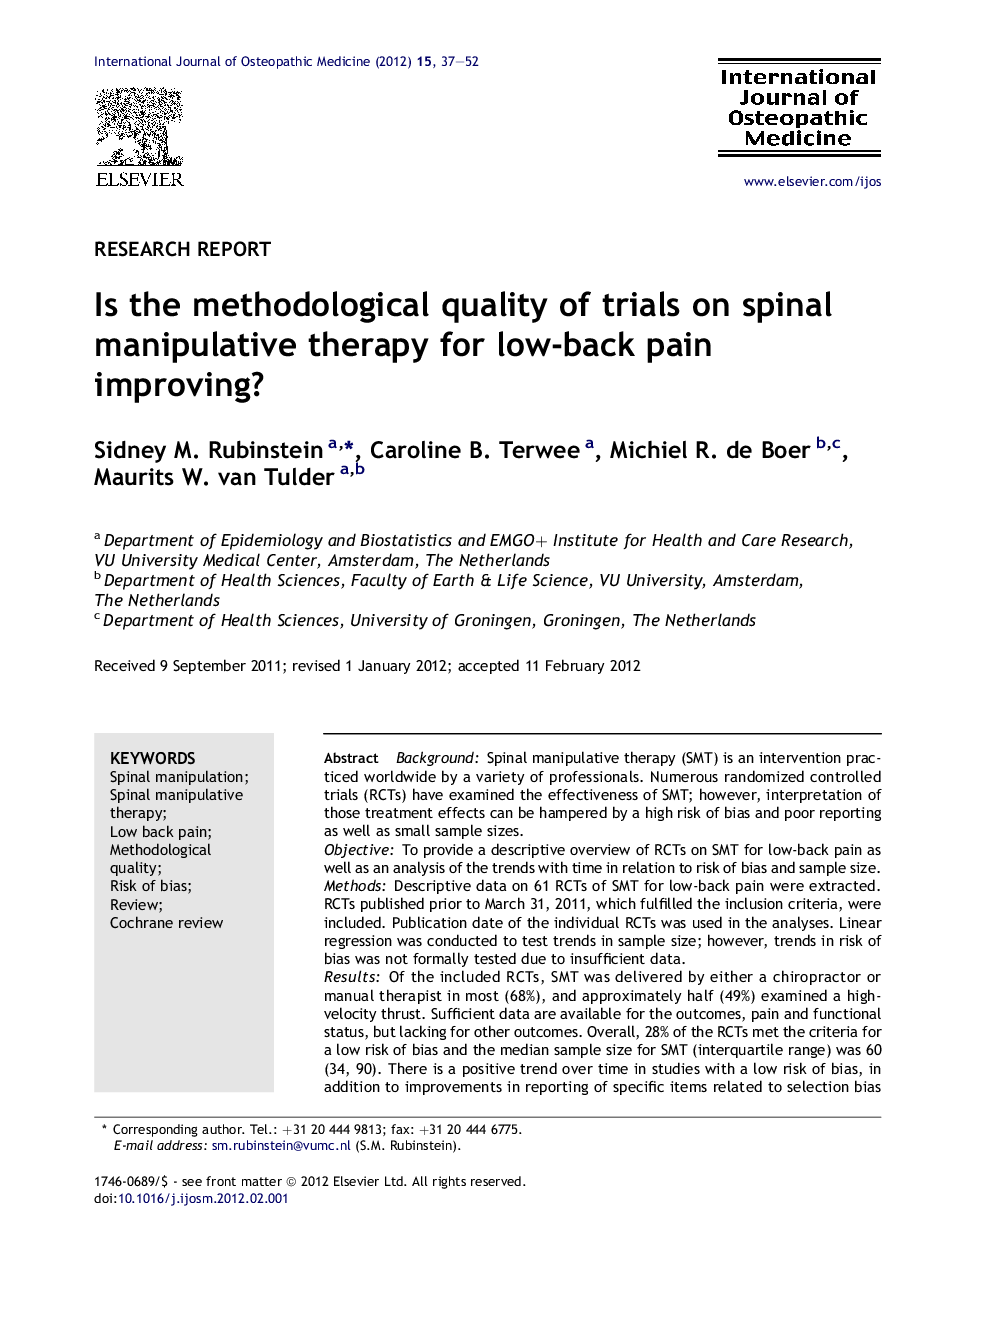 Is the methodological quality of trials on spinal manipulative therapy for low-back pain improving?